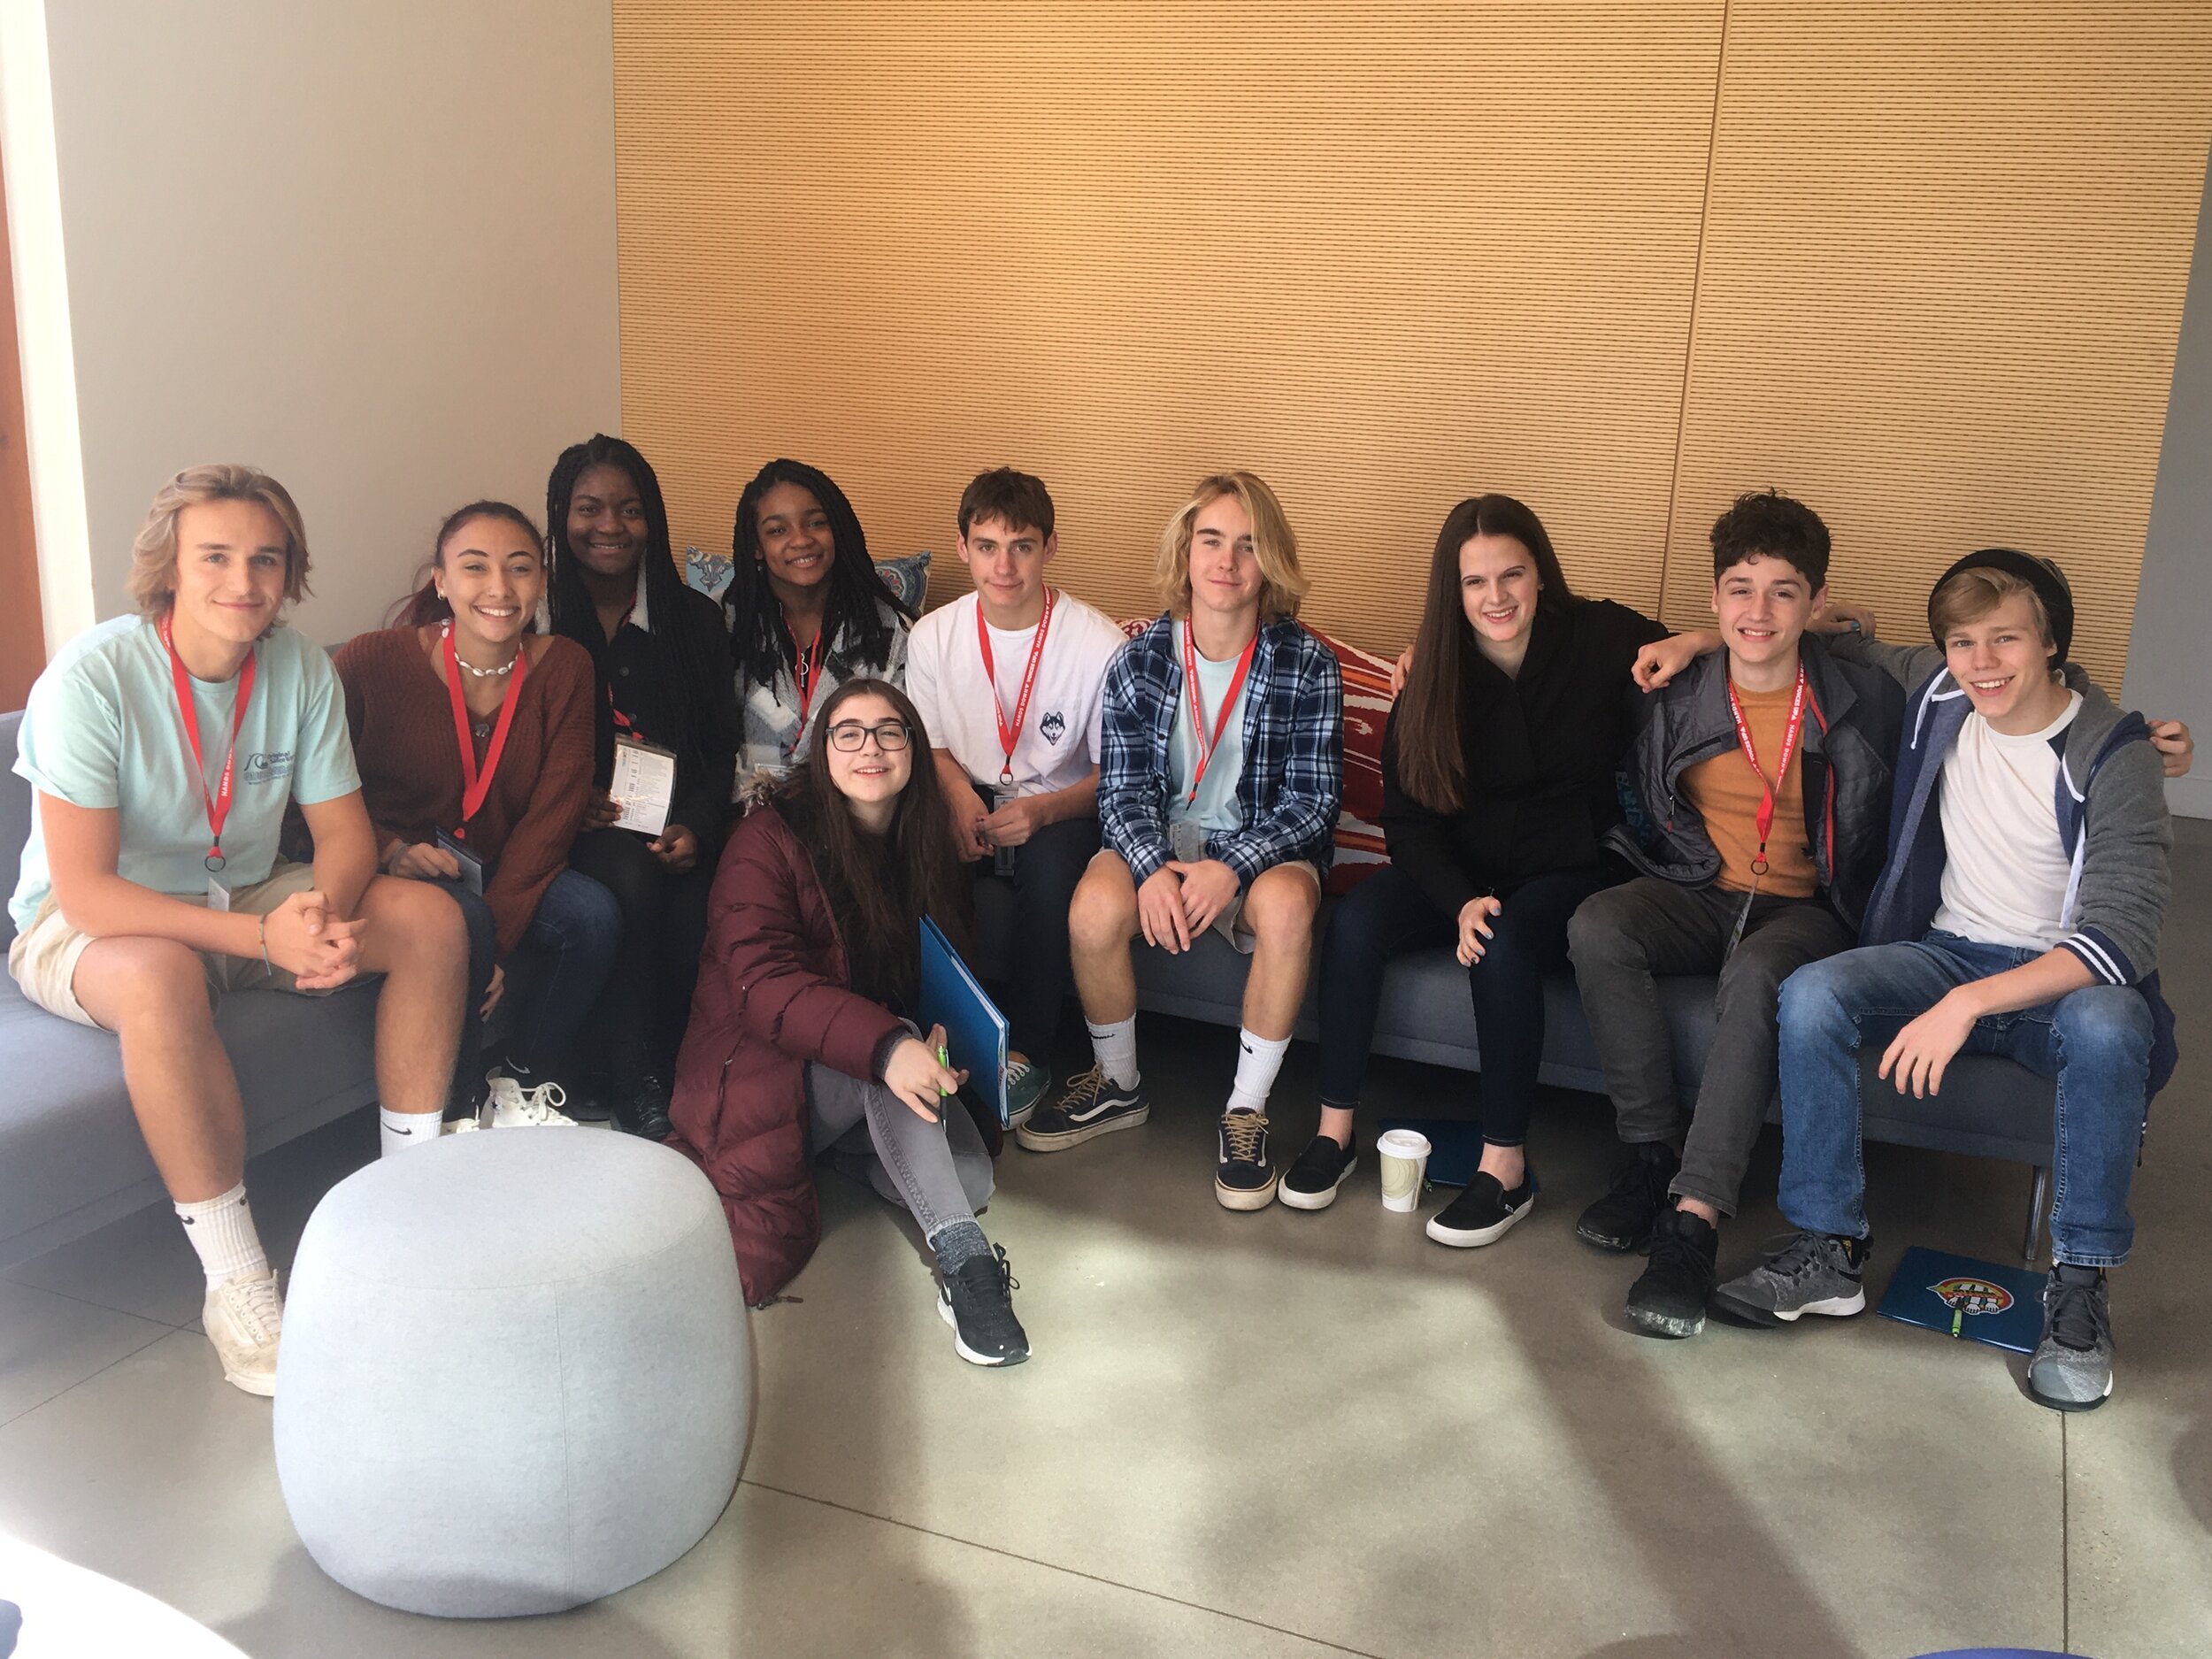  Ten Workspace students from Bethel, Connecticut attended the Hands Down, Voices Up summit in Boise from October 23-25. From left to right: Brady K., Isabella A., Kiana S., Ziya S., Jack D. Forrest A., Andralyn A., Nathaniel V., Tristan F., Sophia B.